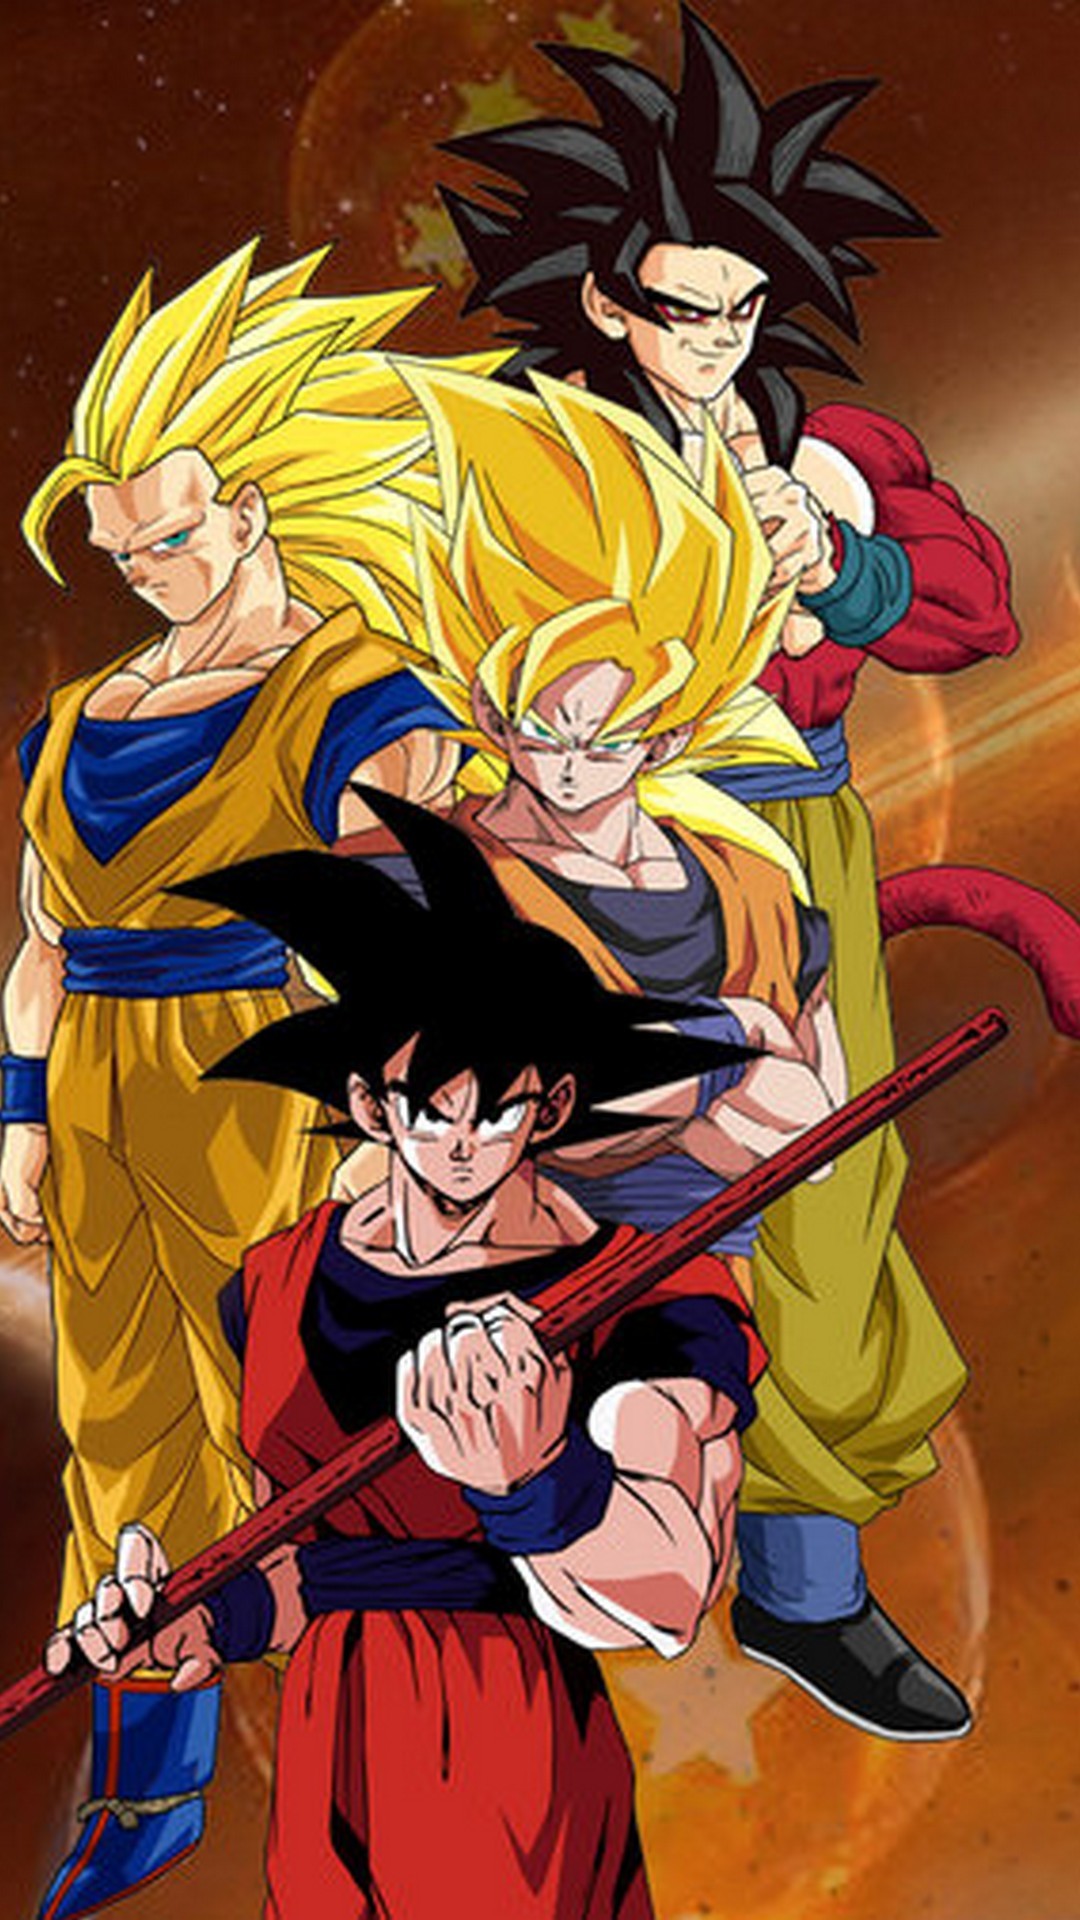 Goku SSJ4 Wallpaper For iPhone with image resolution 1080x1920 pixel. You can make this wallpaper for your iPhone 5, 6, 7, 8, X backgrounds, Mobile Screensaver, or iPad Lock Screen